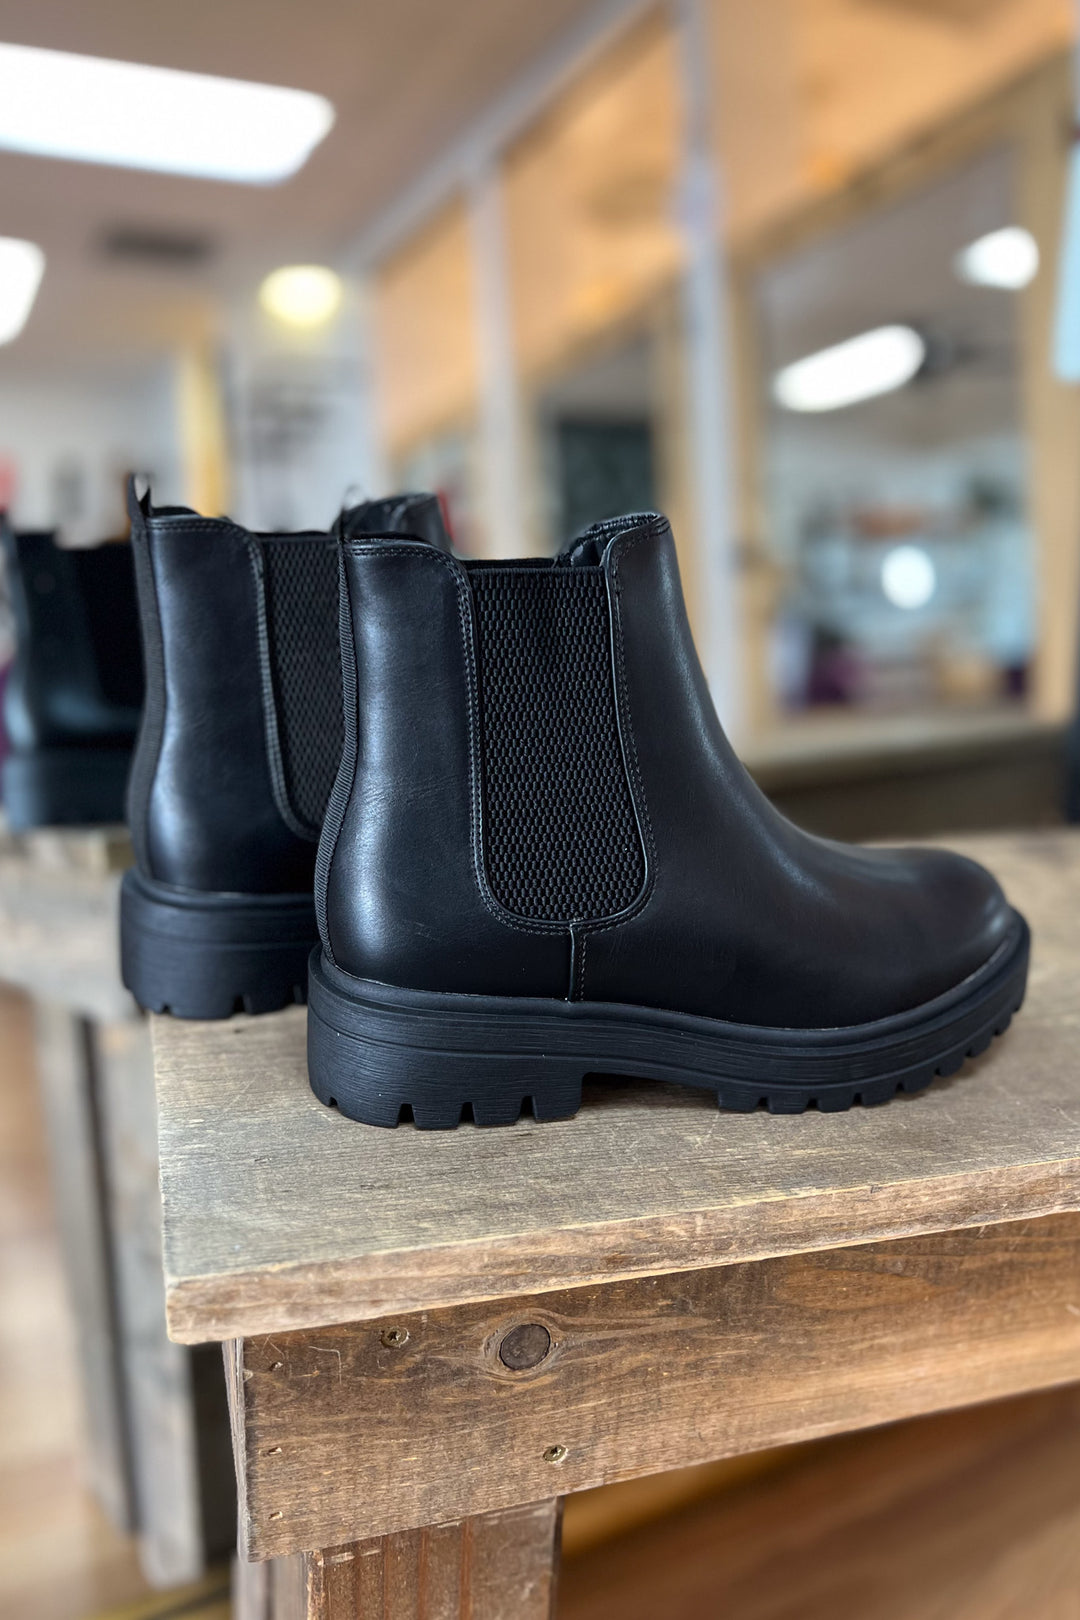 Paden Boots in Black - ShopSpoiled